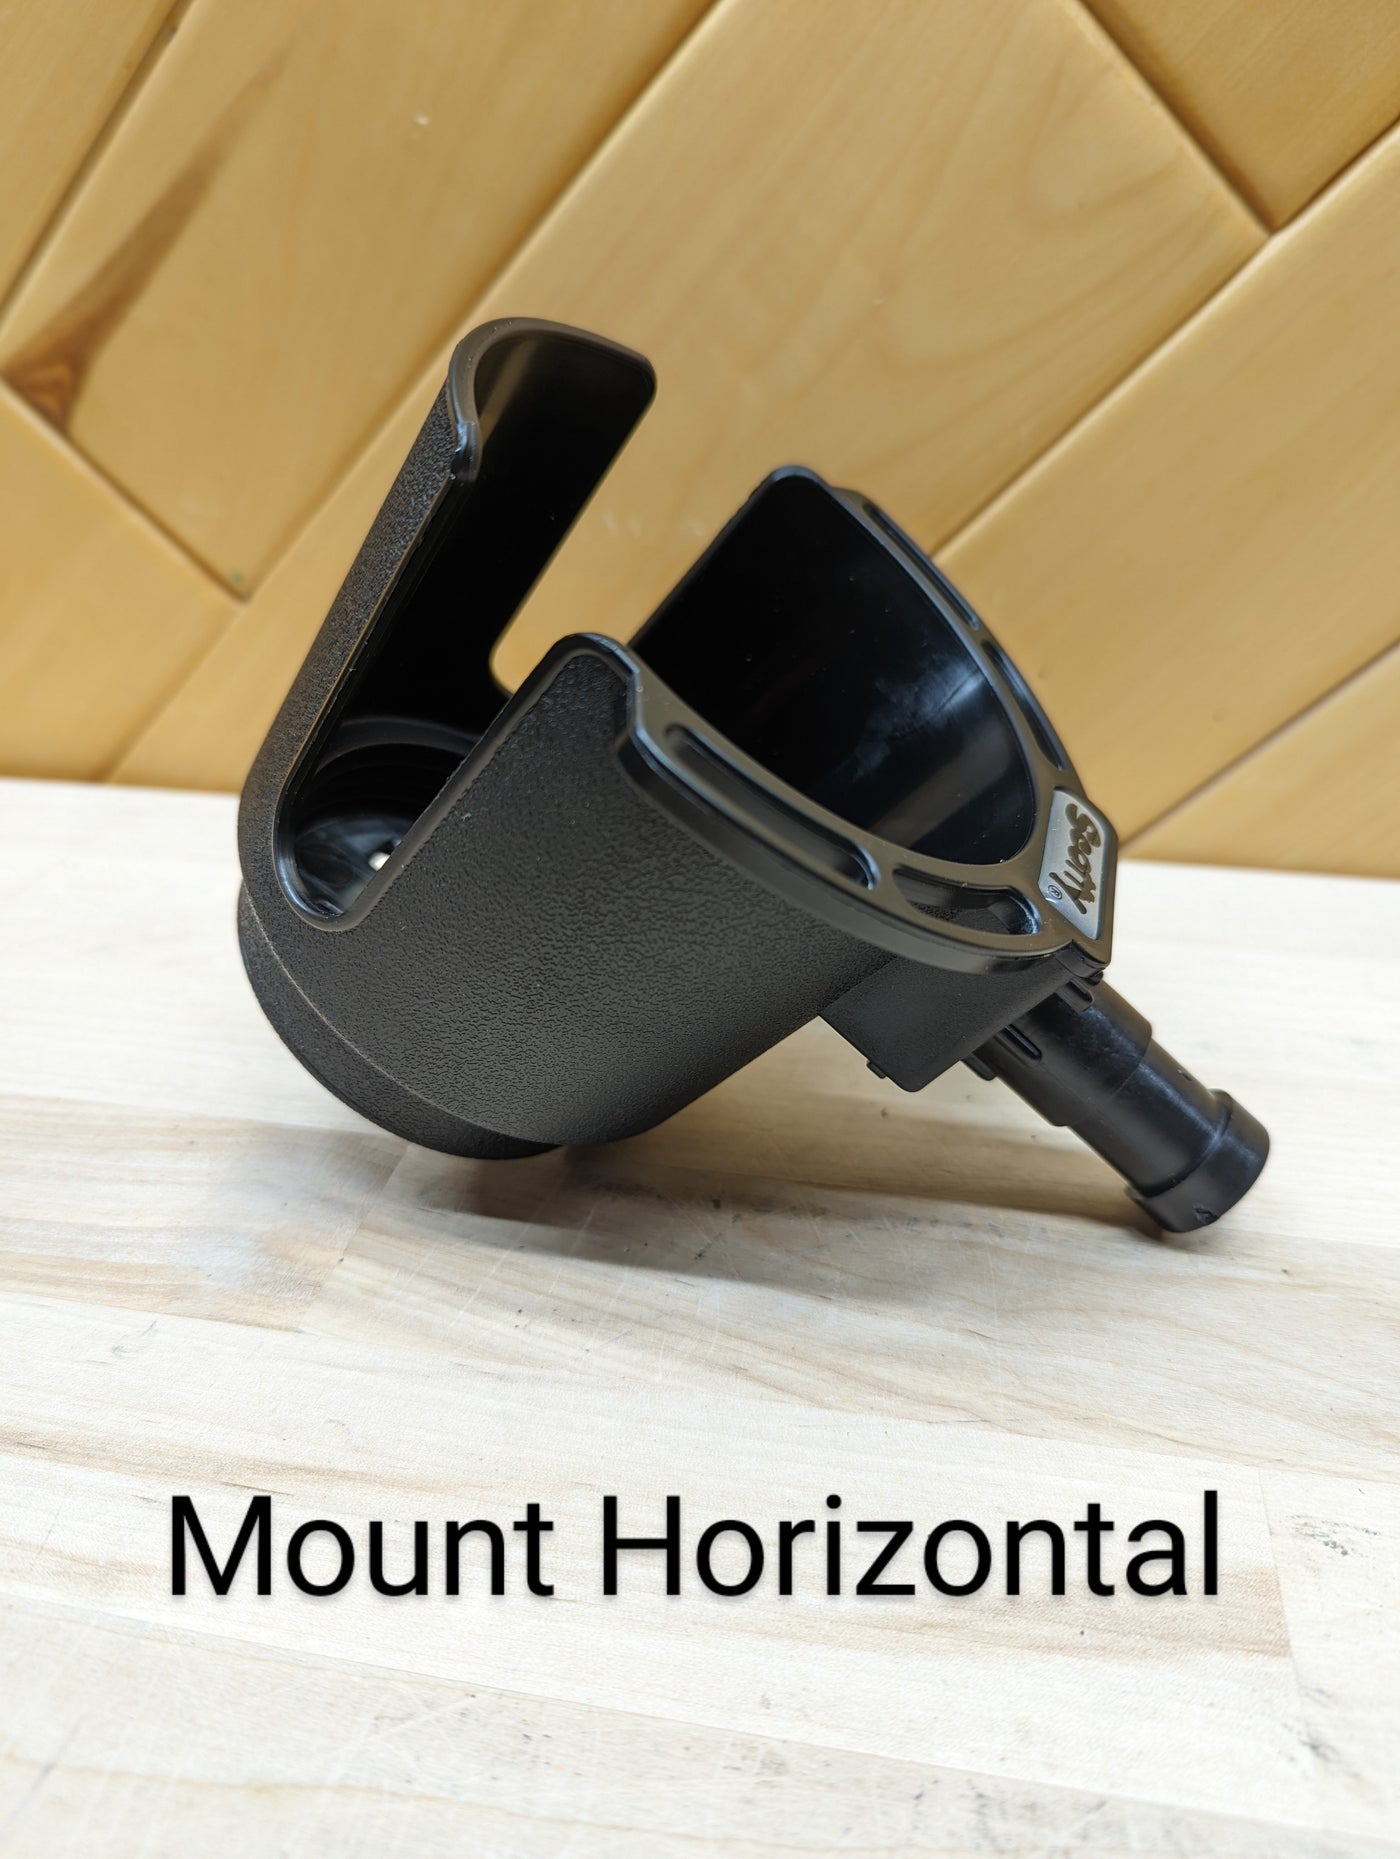 Scotty Cup Holder – Fishing Addiction Gear